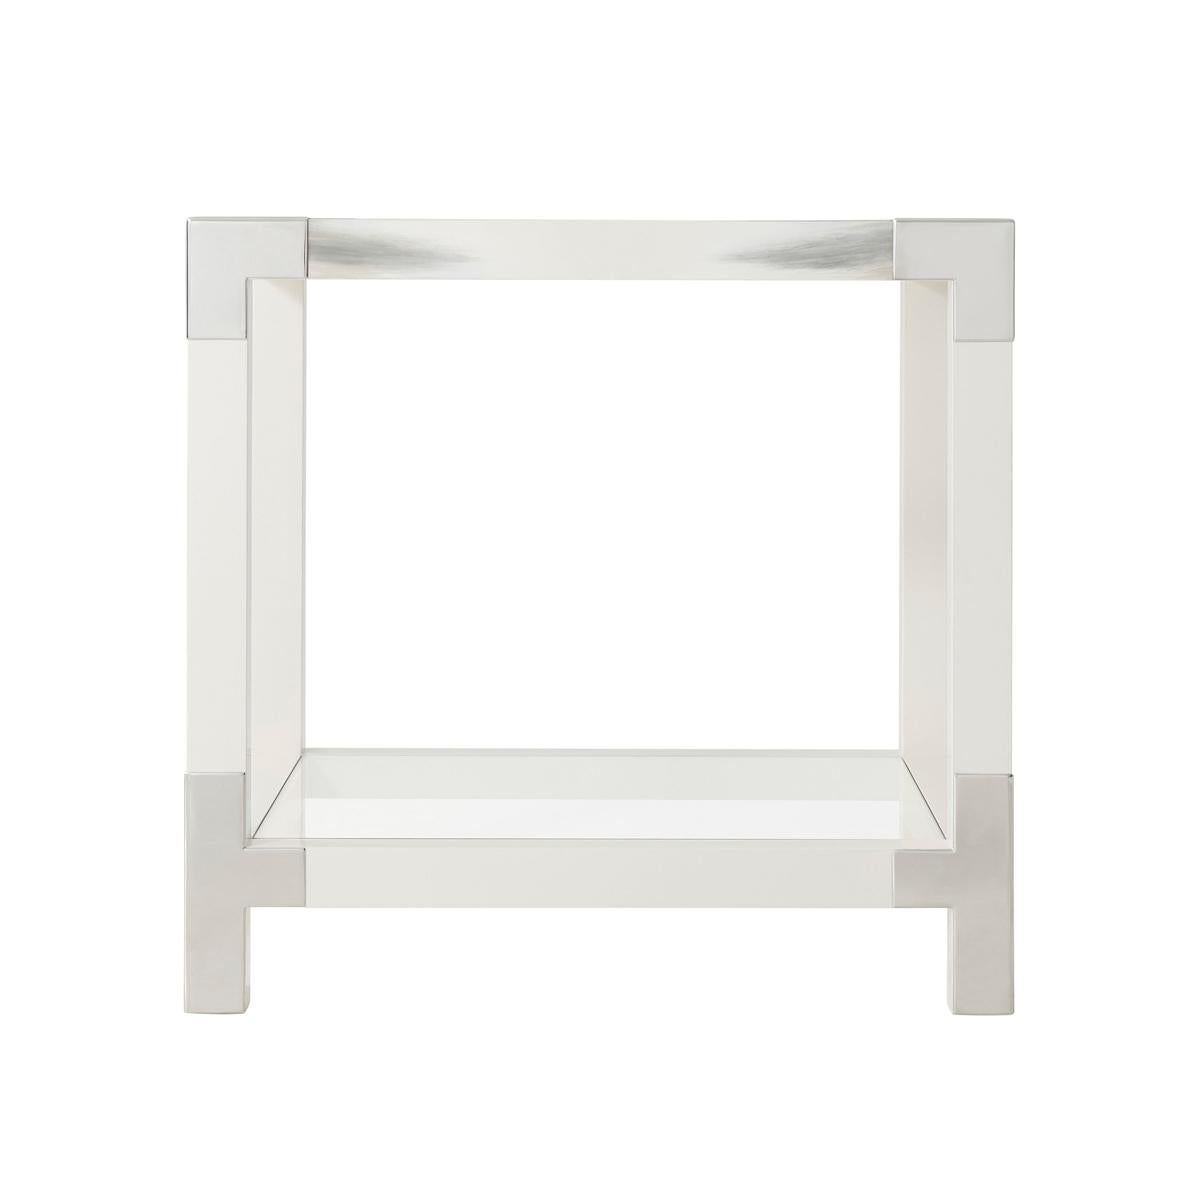 A white lacquered and faux horn painted accent table, the square glass inset top with stainless steel edged corners, on square legs joined by stretchers and an inset glass under tier.

Dimensions: 25